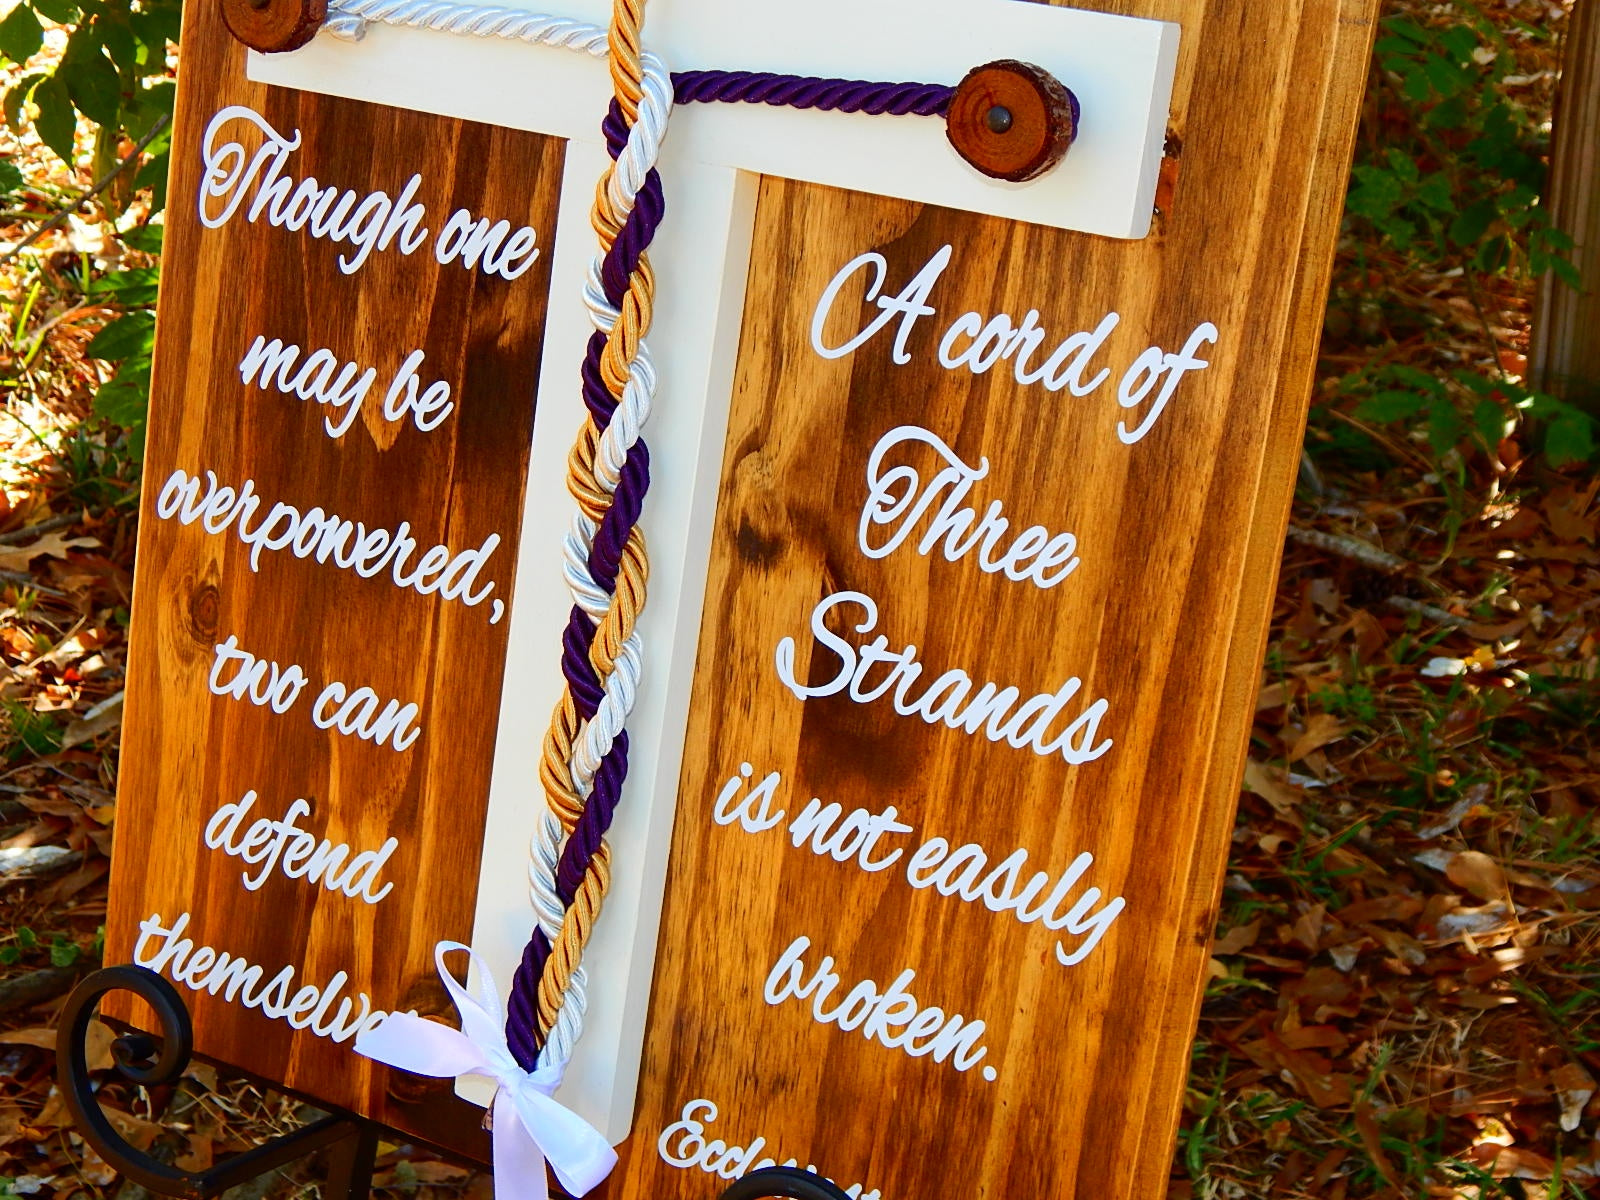 Unity Braids® A Cord Of Three Strands Cross Board Signs With Real Tree Pegs - Unity Braids